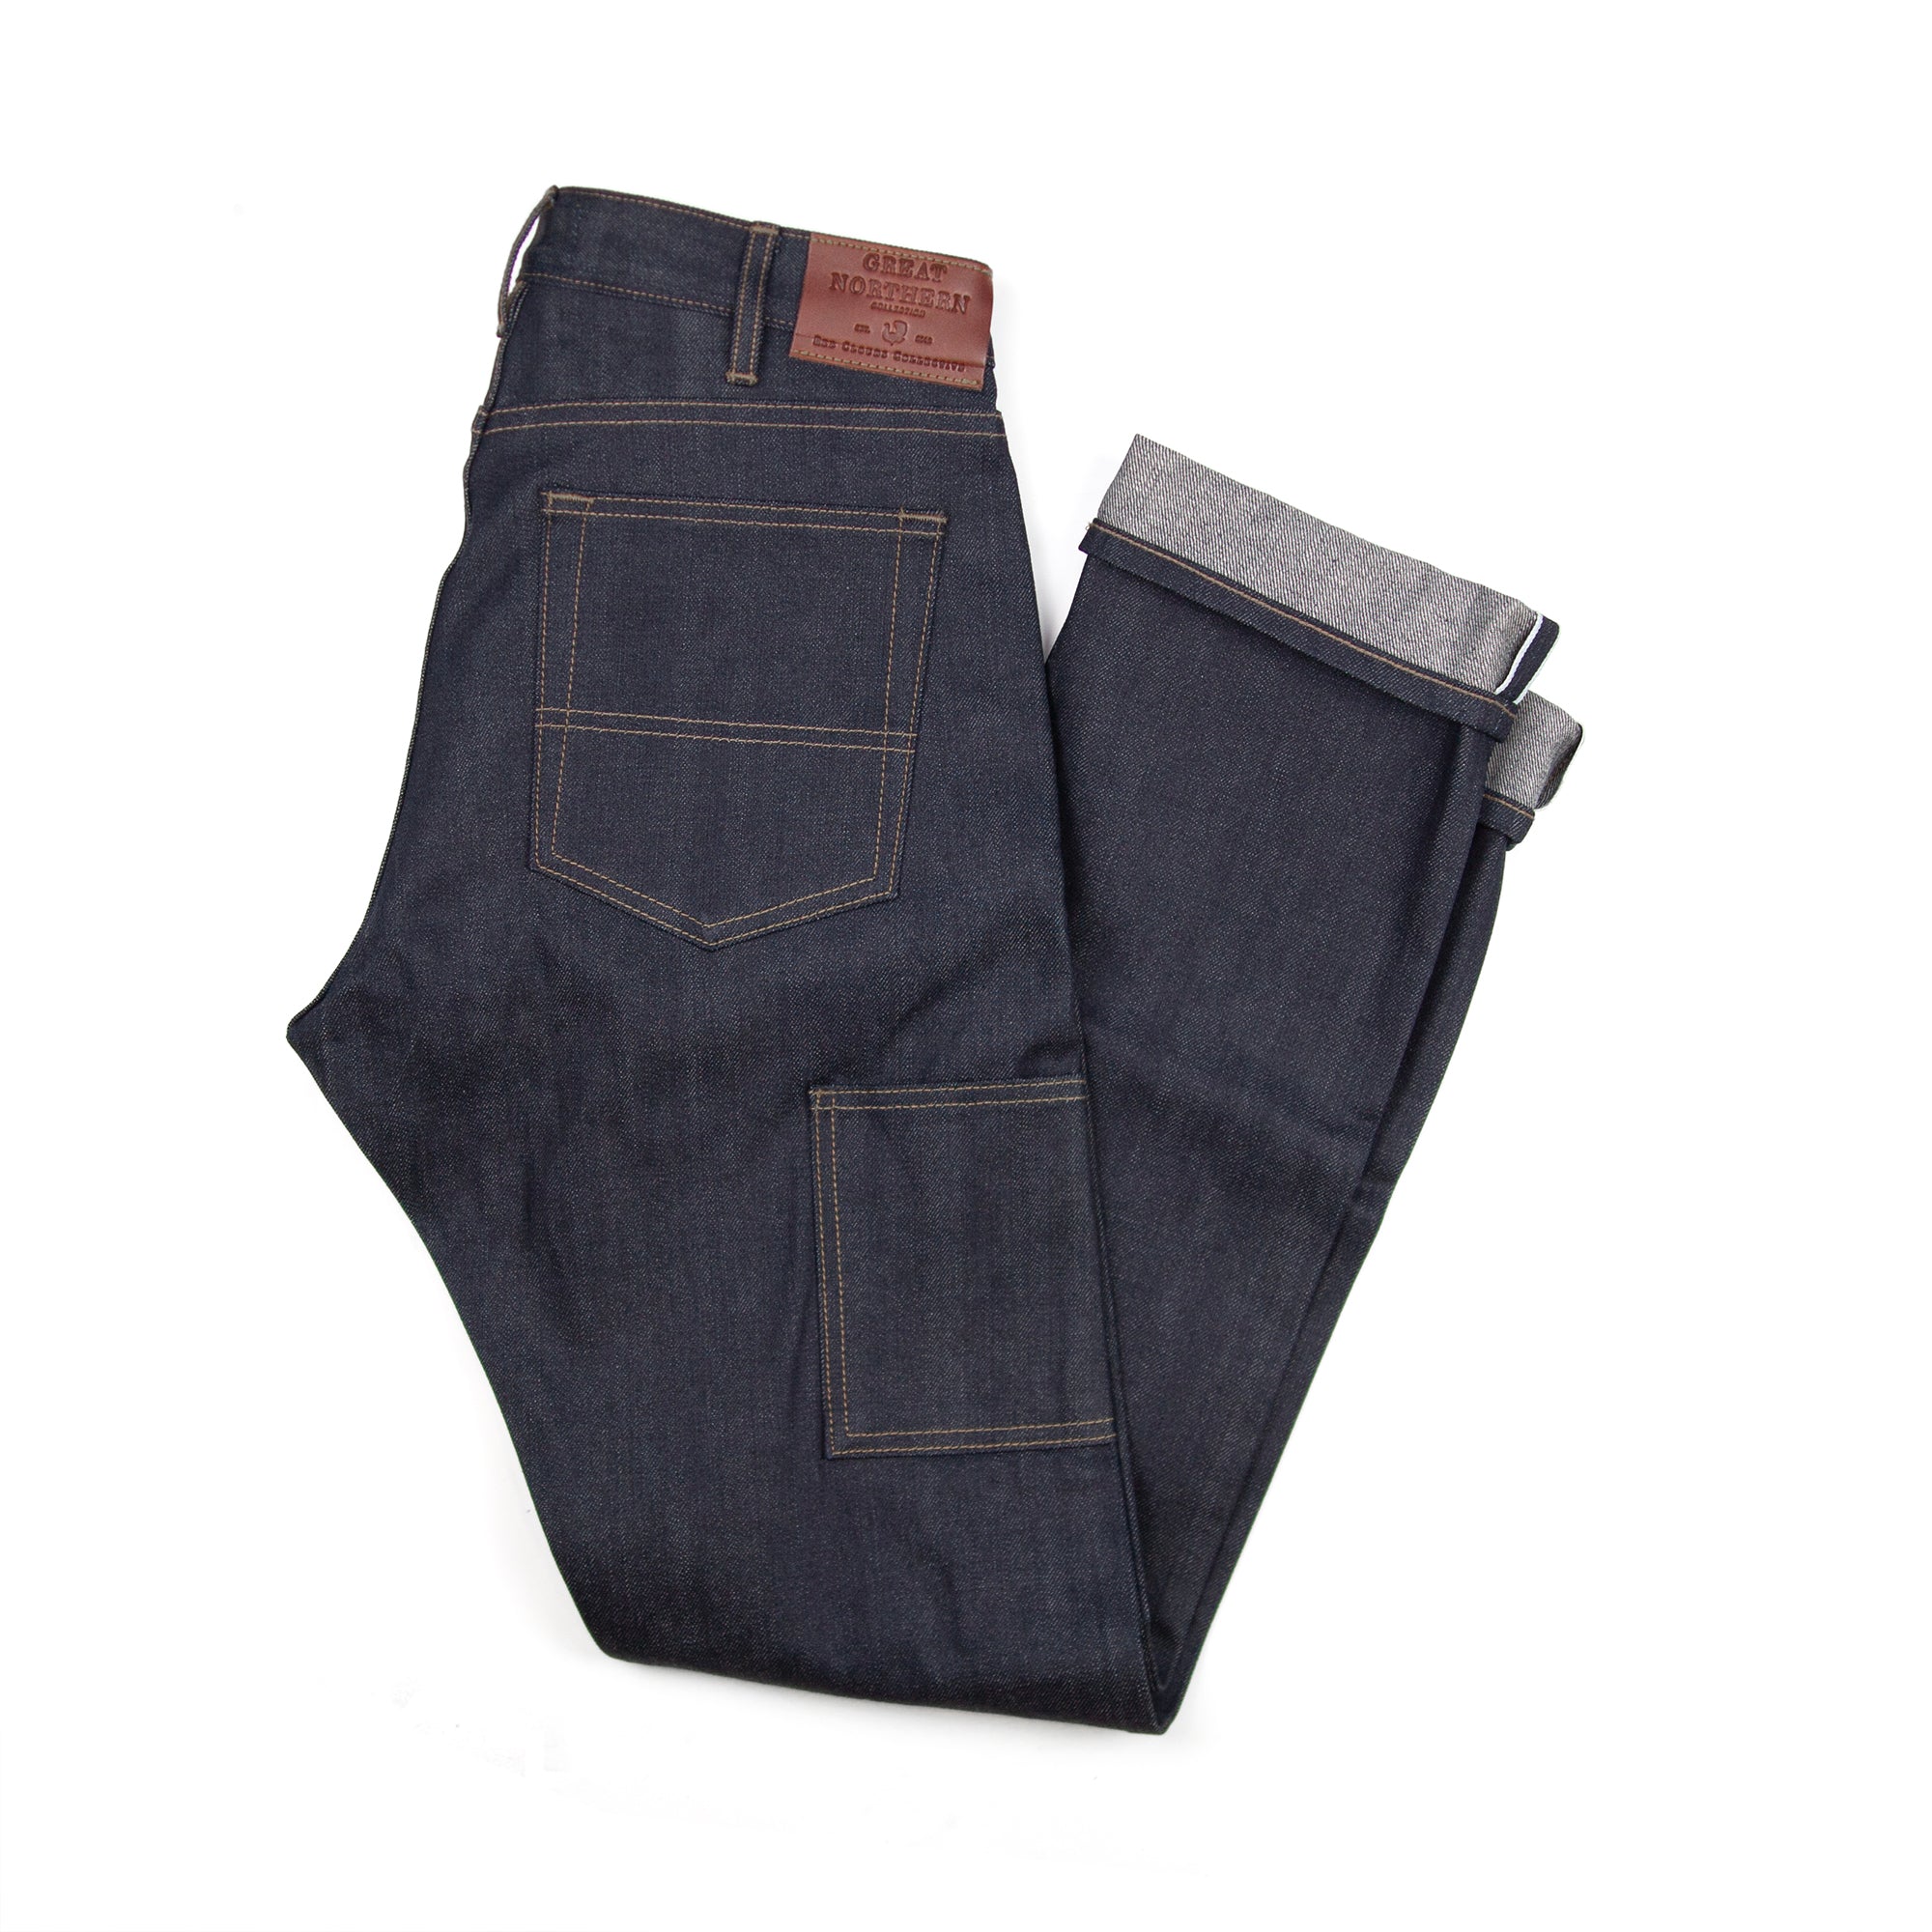 GN.02 Selvage Denim Pants - Red Clouds Collective - Made in the USA